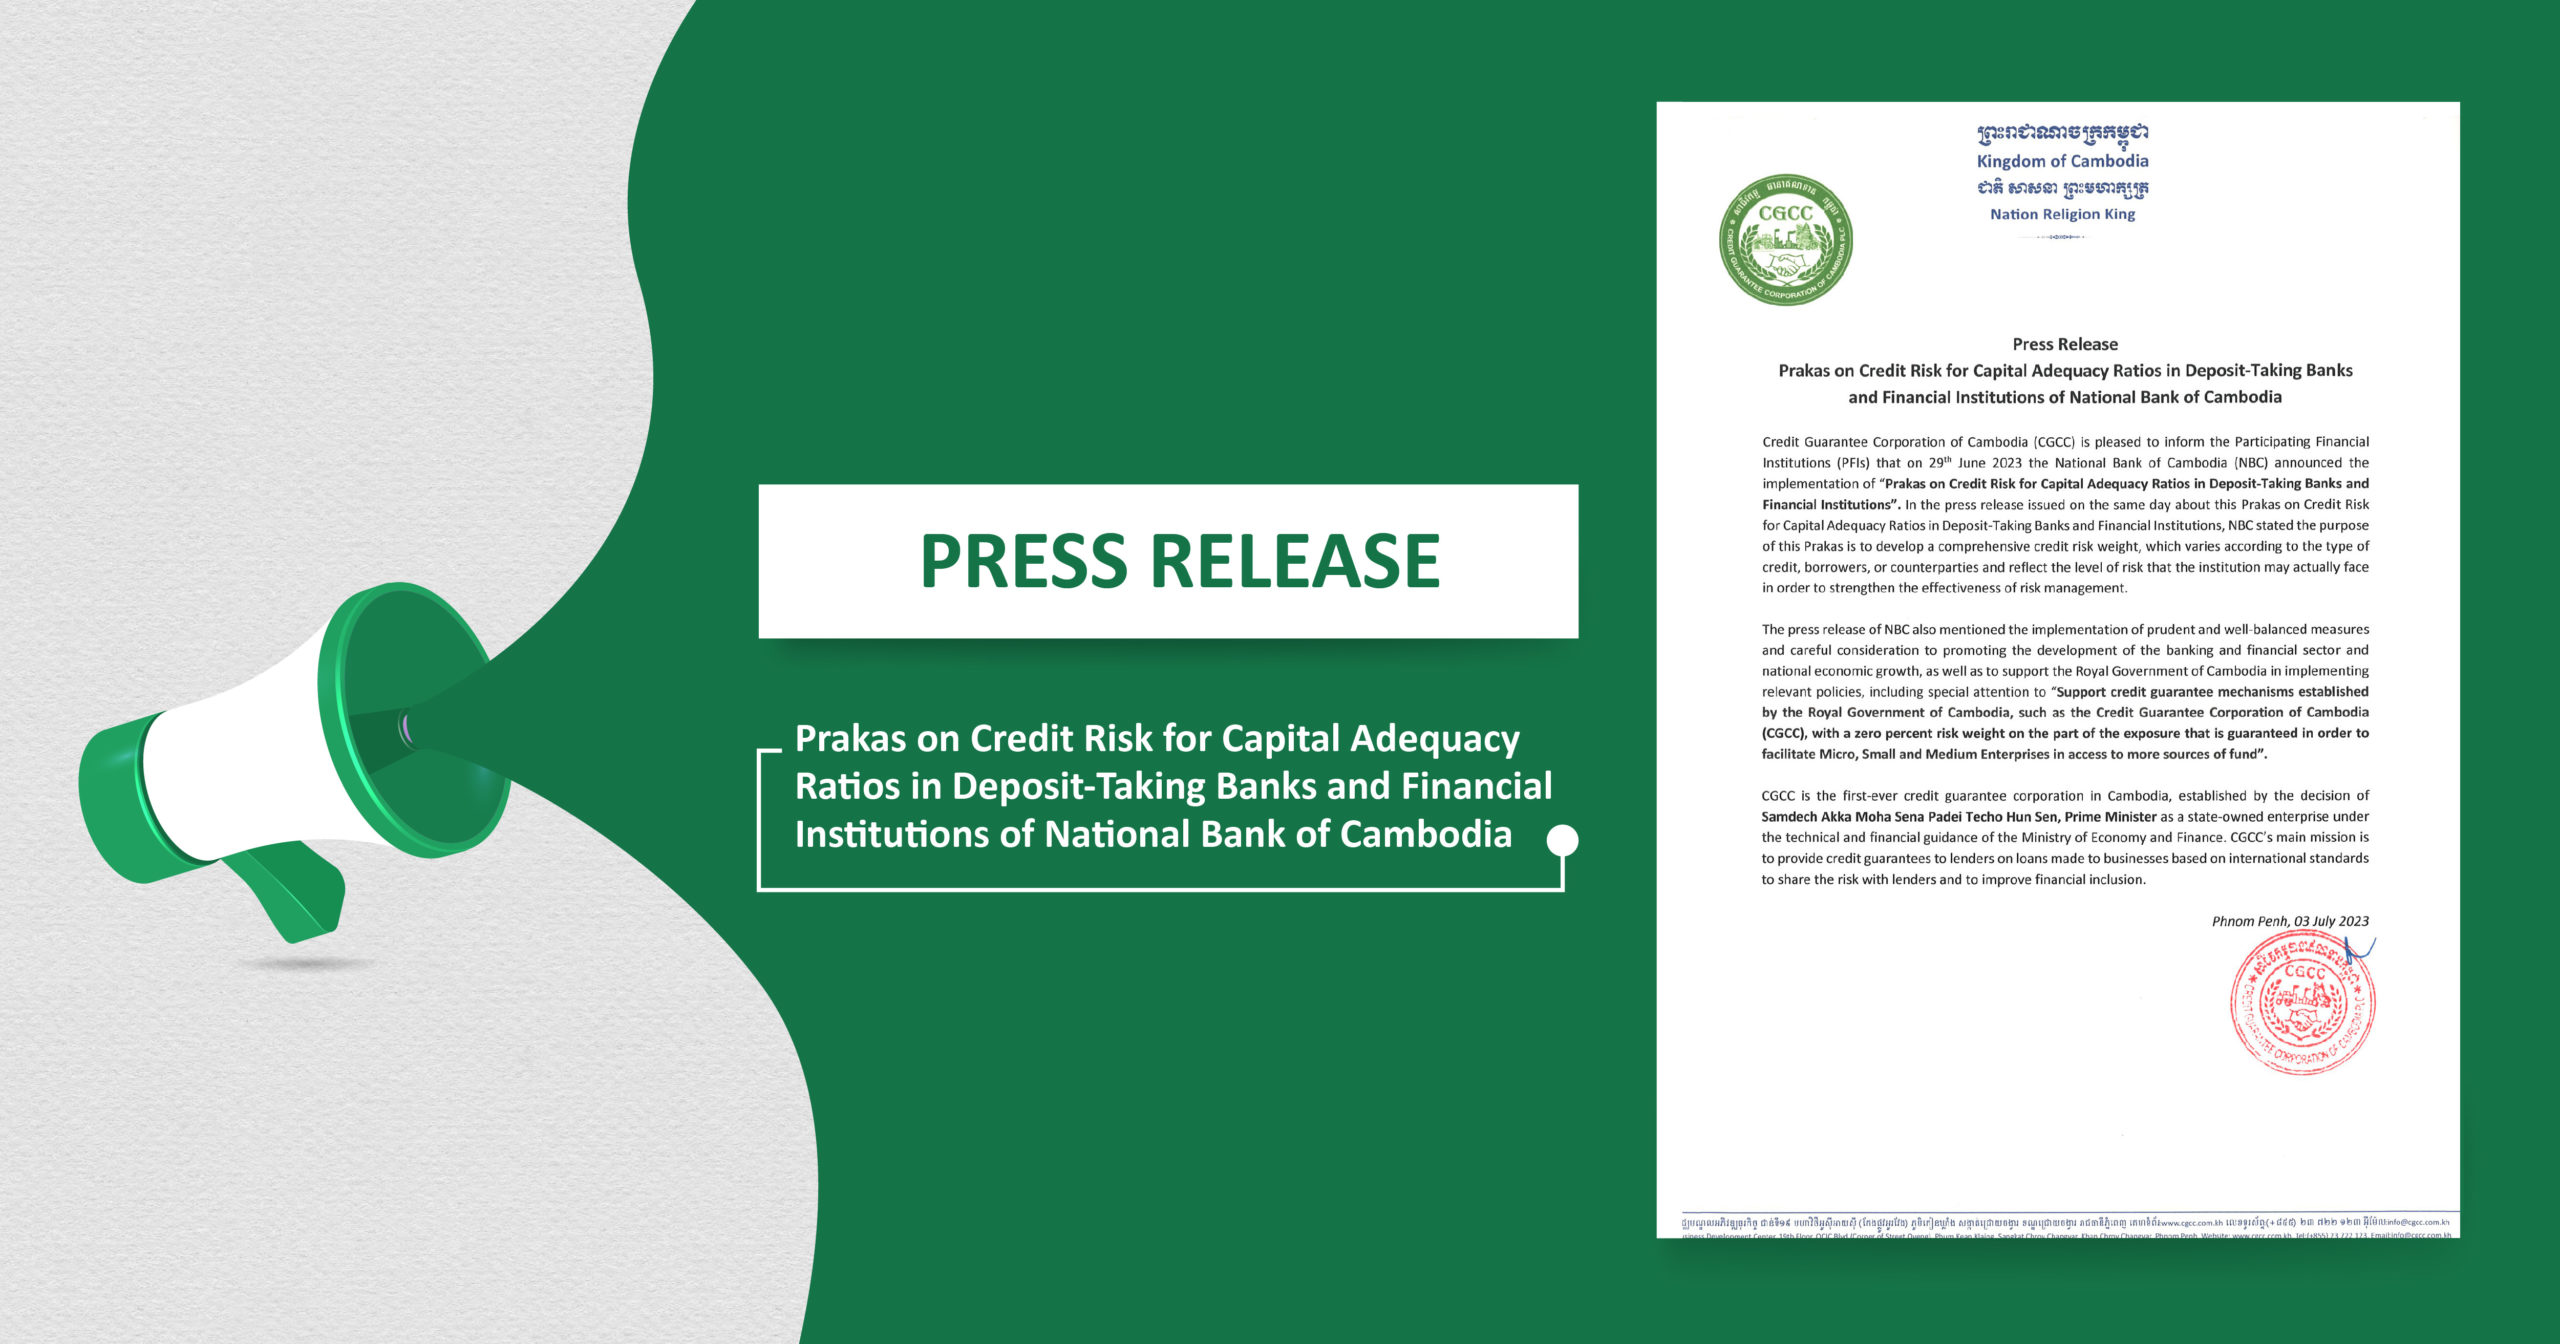 Press Release - Prakas on Credit Risk for Capital Adequacy Ratios in Deposit-Taking Banks and Financial Institutions of National Bank of Cambodia